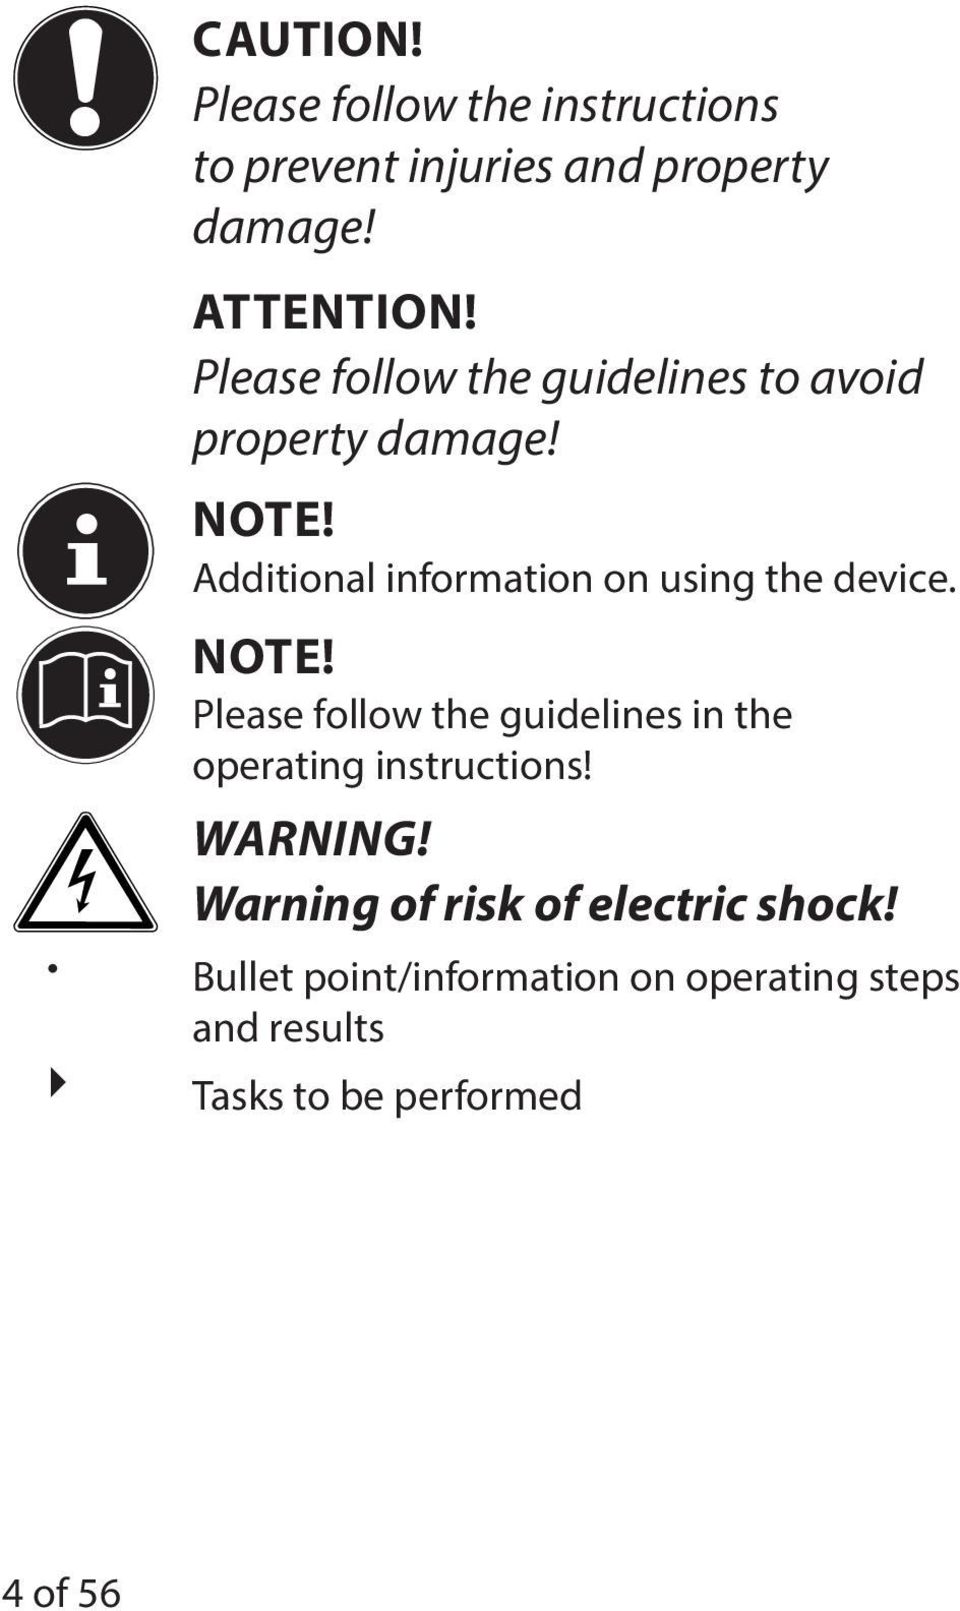 Additional information on using the device. NOTE!